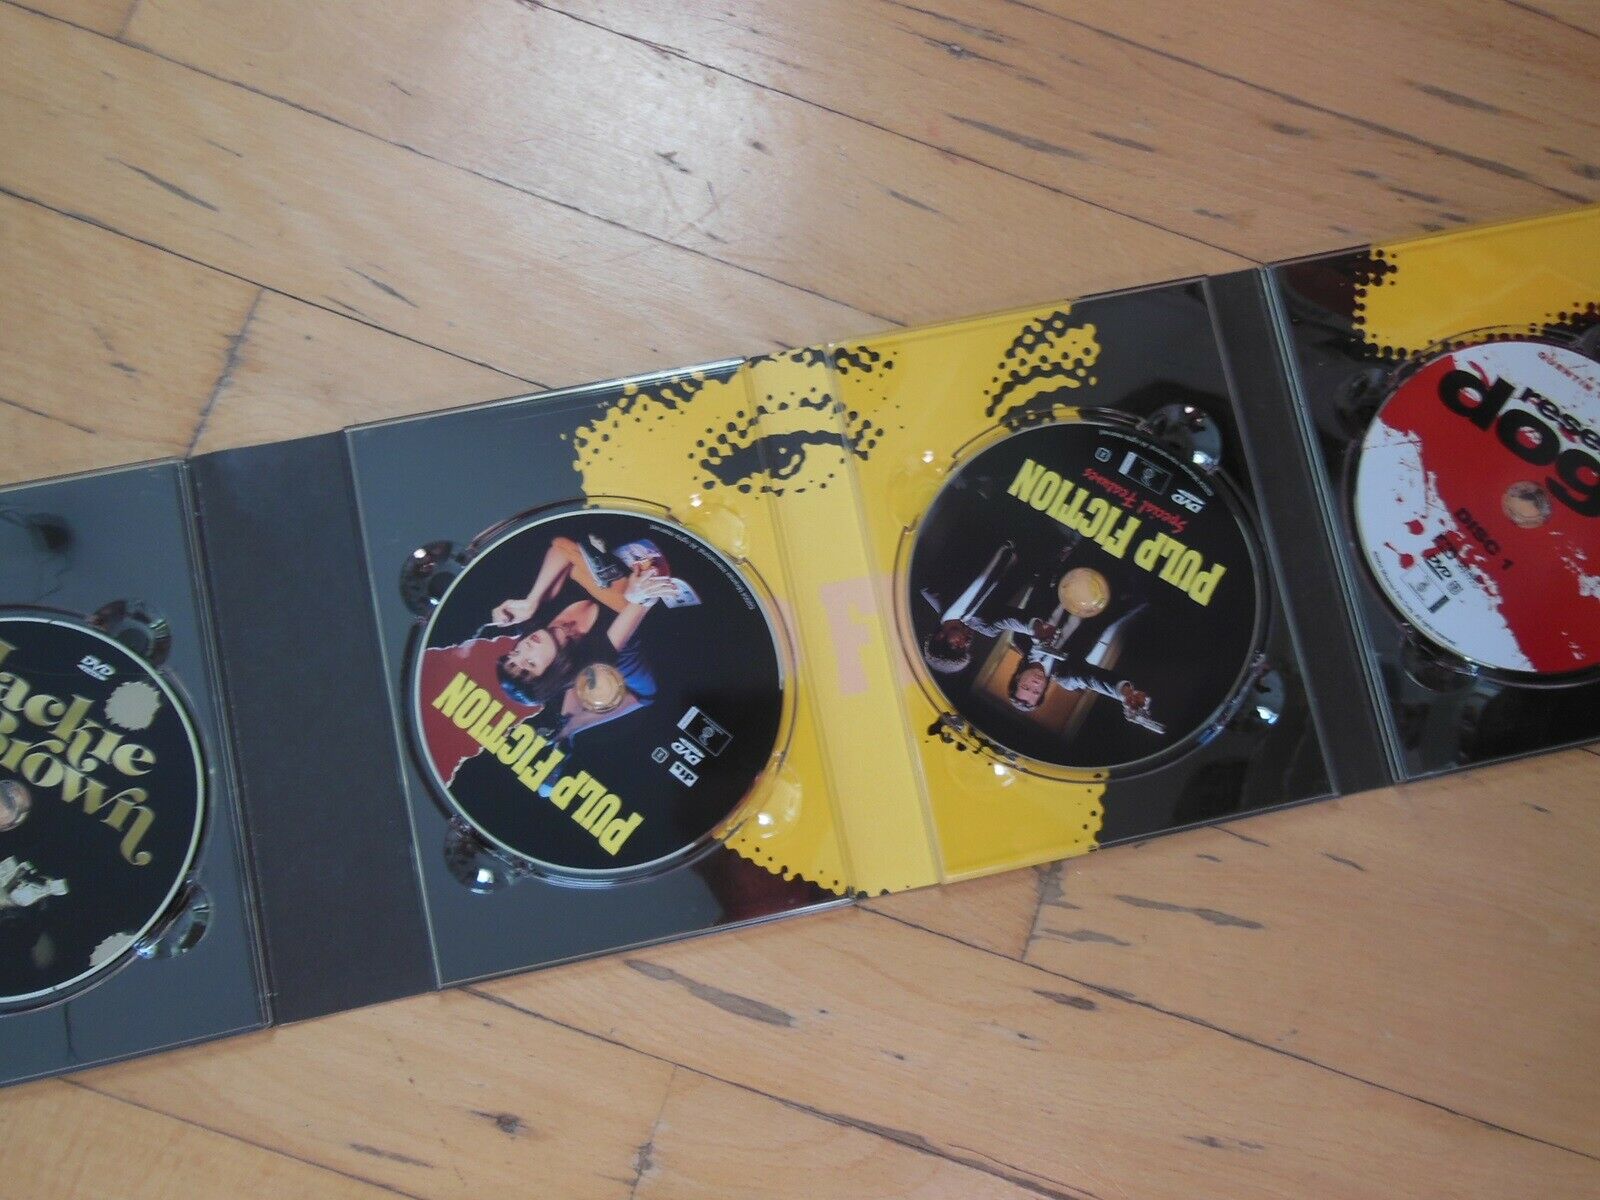 The Quentin Tarantino 10 disc Collection DK TEKST,